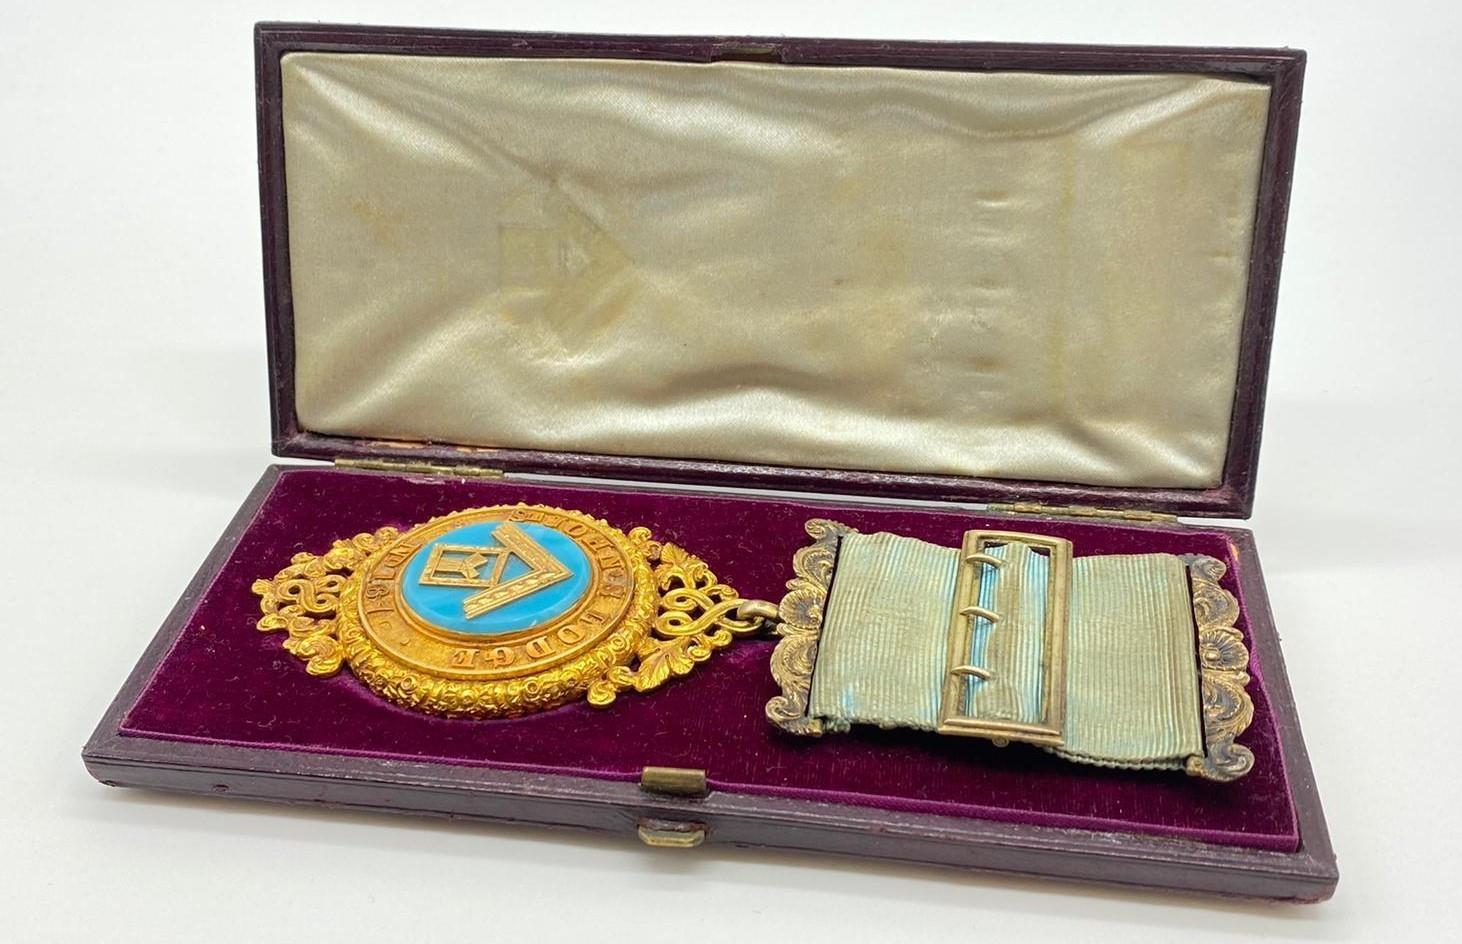 18ct gold Masonic jewel dated 1865 from the St's John lodge Hampstead number 167, weight 62.3g total - Image 2 of 8